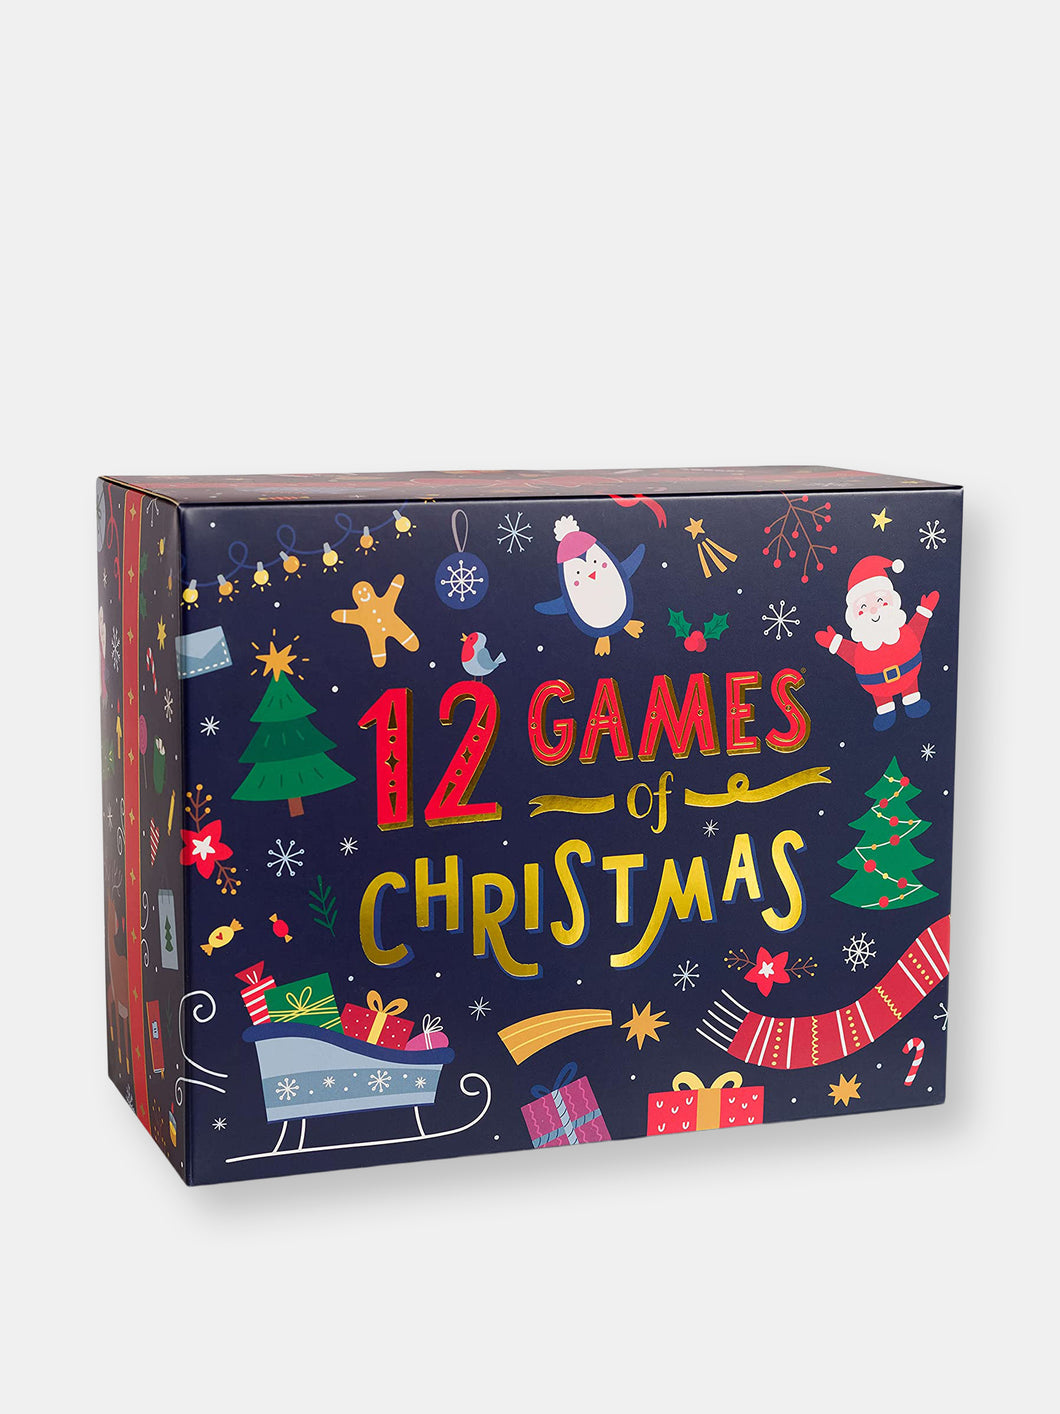 12 Games of Christmas - 12 Hilarious Holiday Games